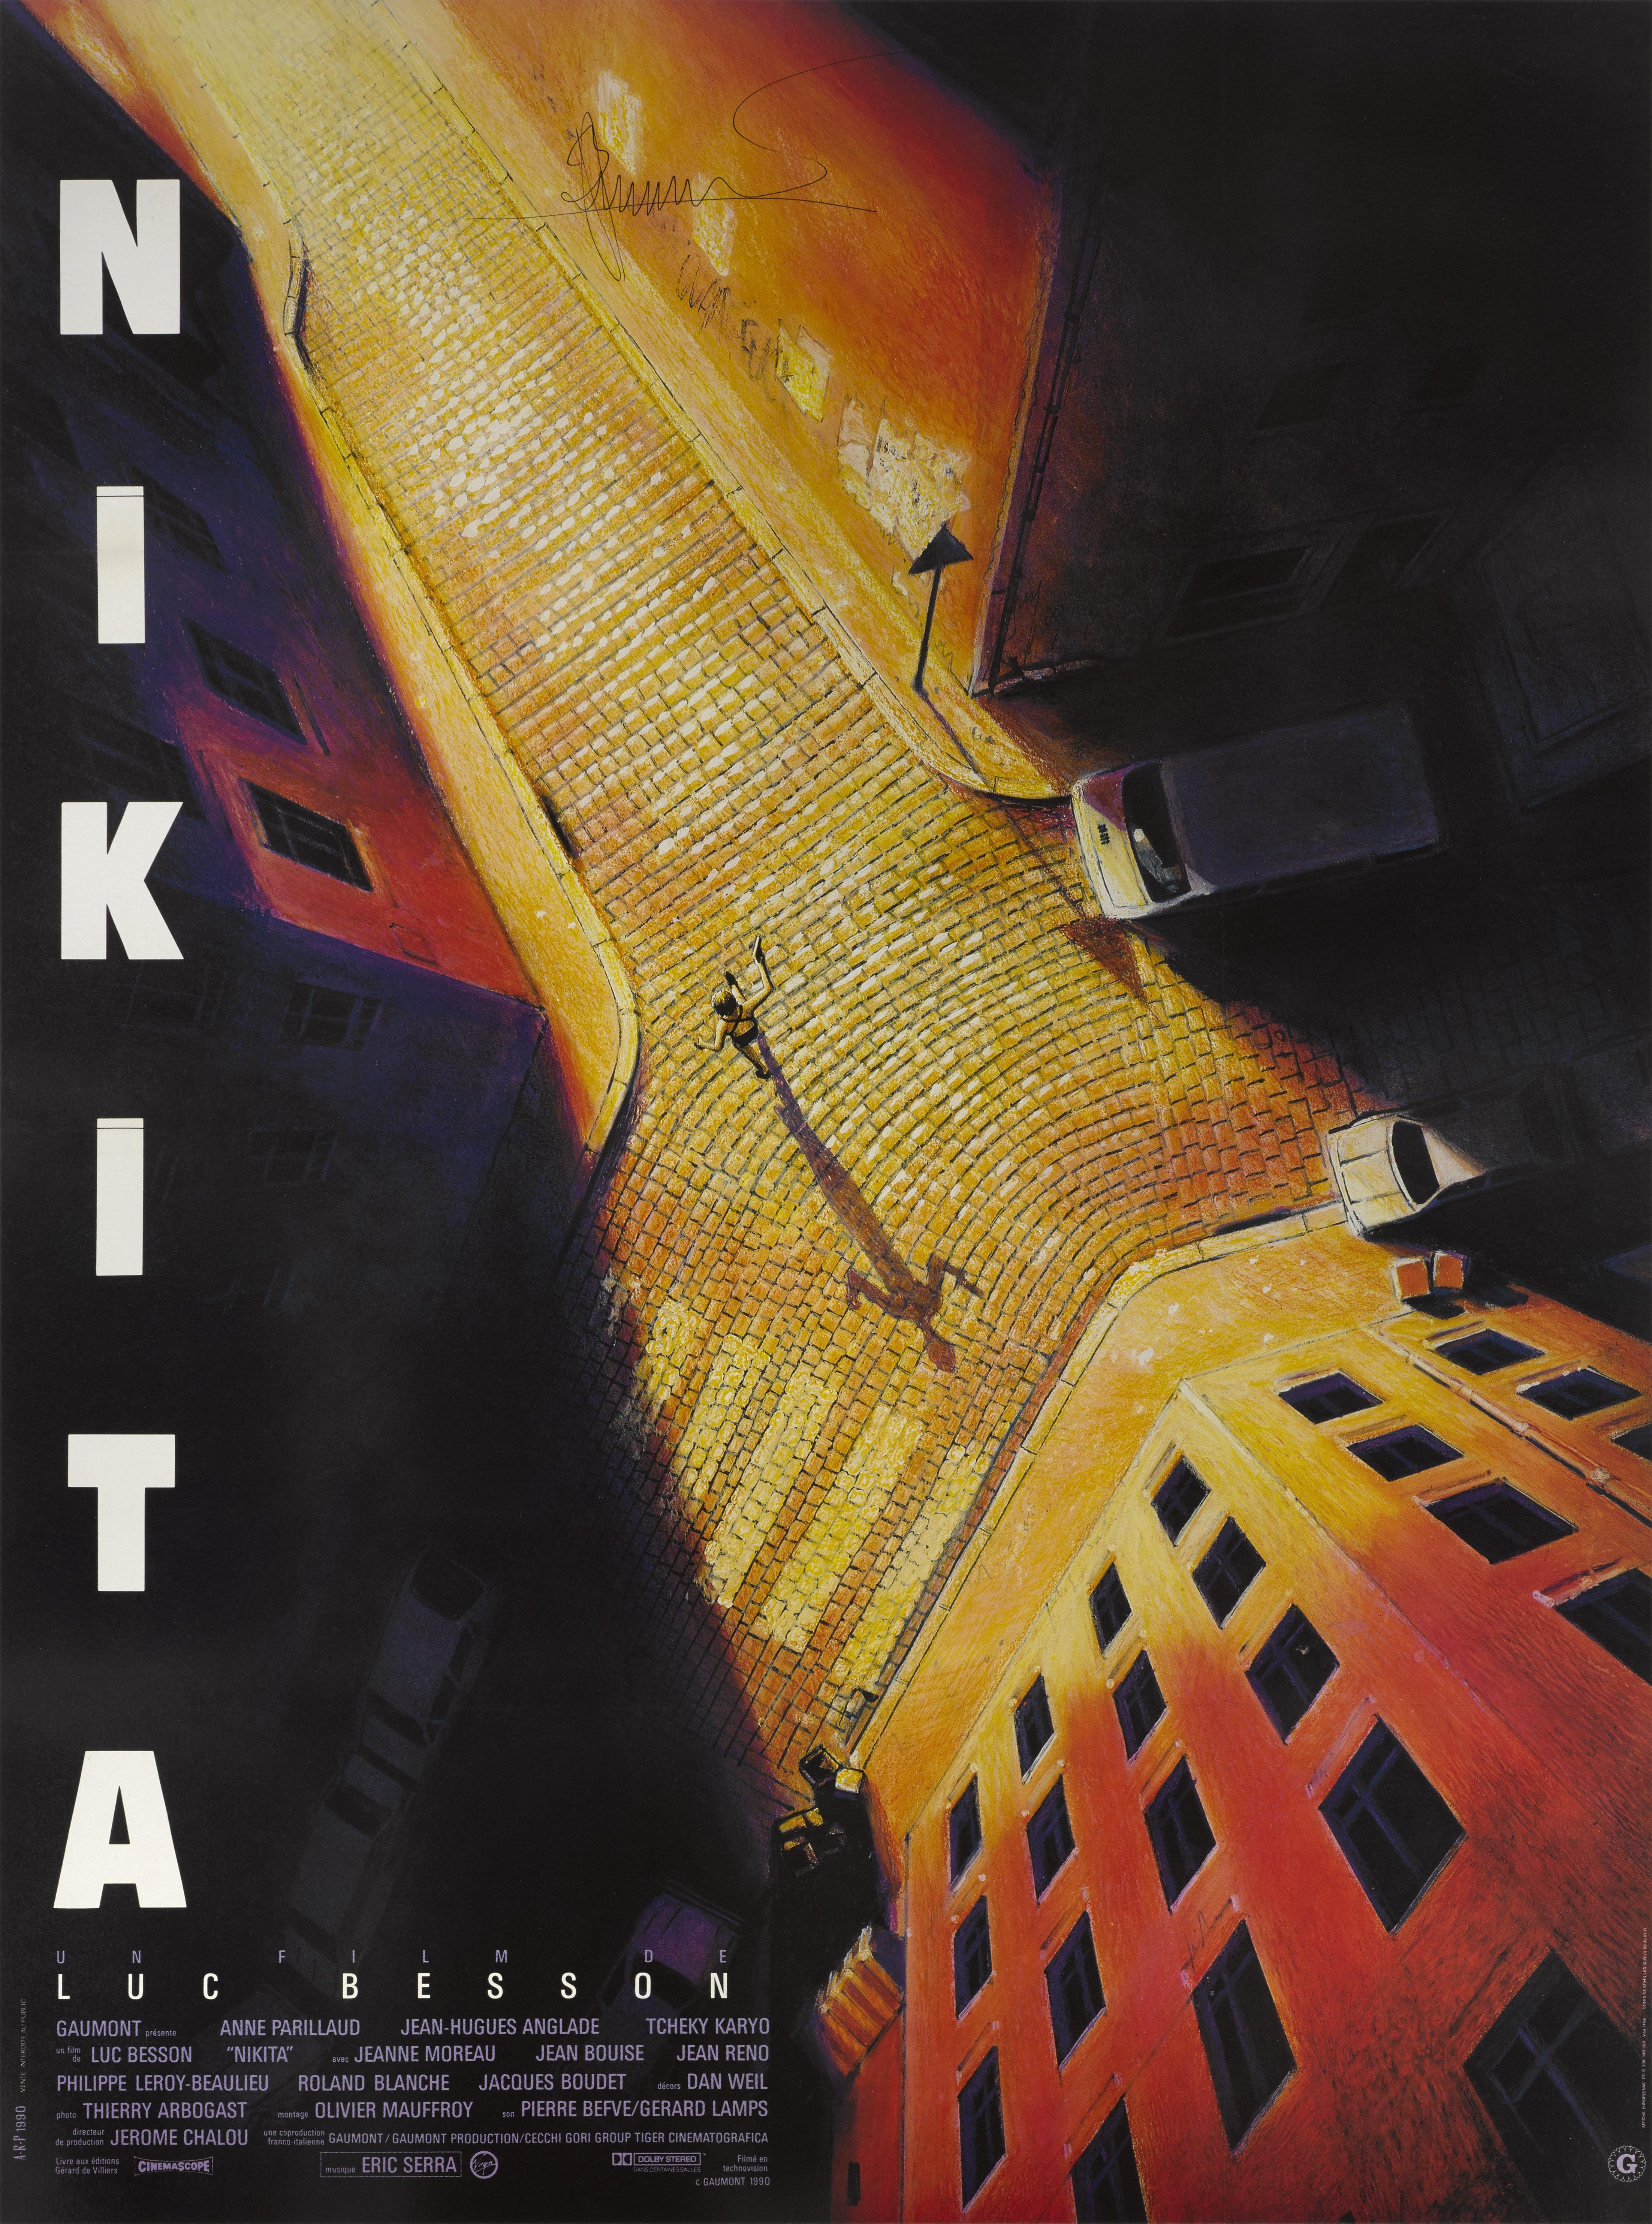 Original French film poster for Nikita 1990.
This action thriller was written and directed by Luc Besson, and stars Anne Parillaud in the title role. Troubled teenager, Nikita is sentenced to a life in prison, but is given the choice of either